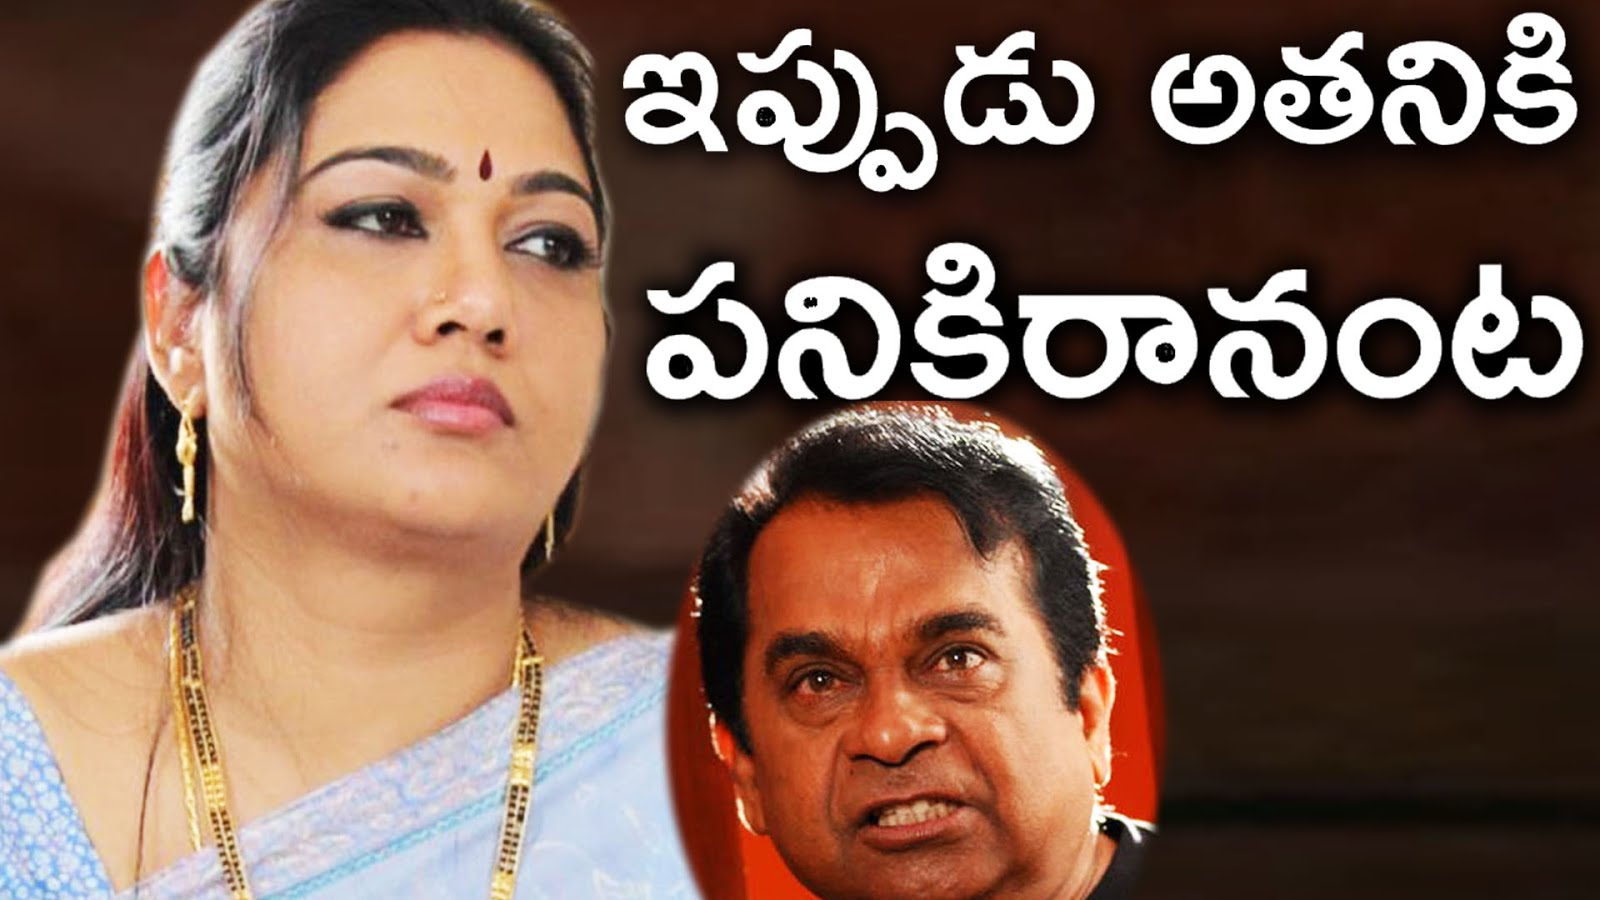 Actress Hema About her Issues With Brahmanandam |అందువల్లే ఆఫర్స్ రాకుండా చేశాడేమో Tollywood Centra